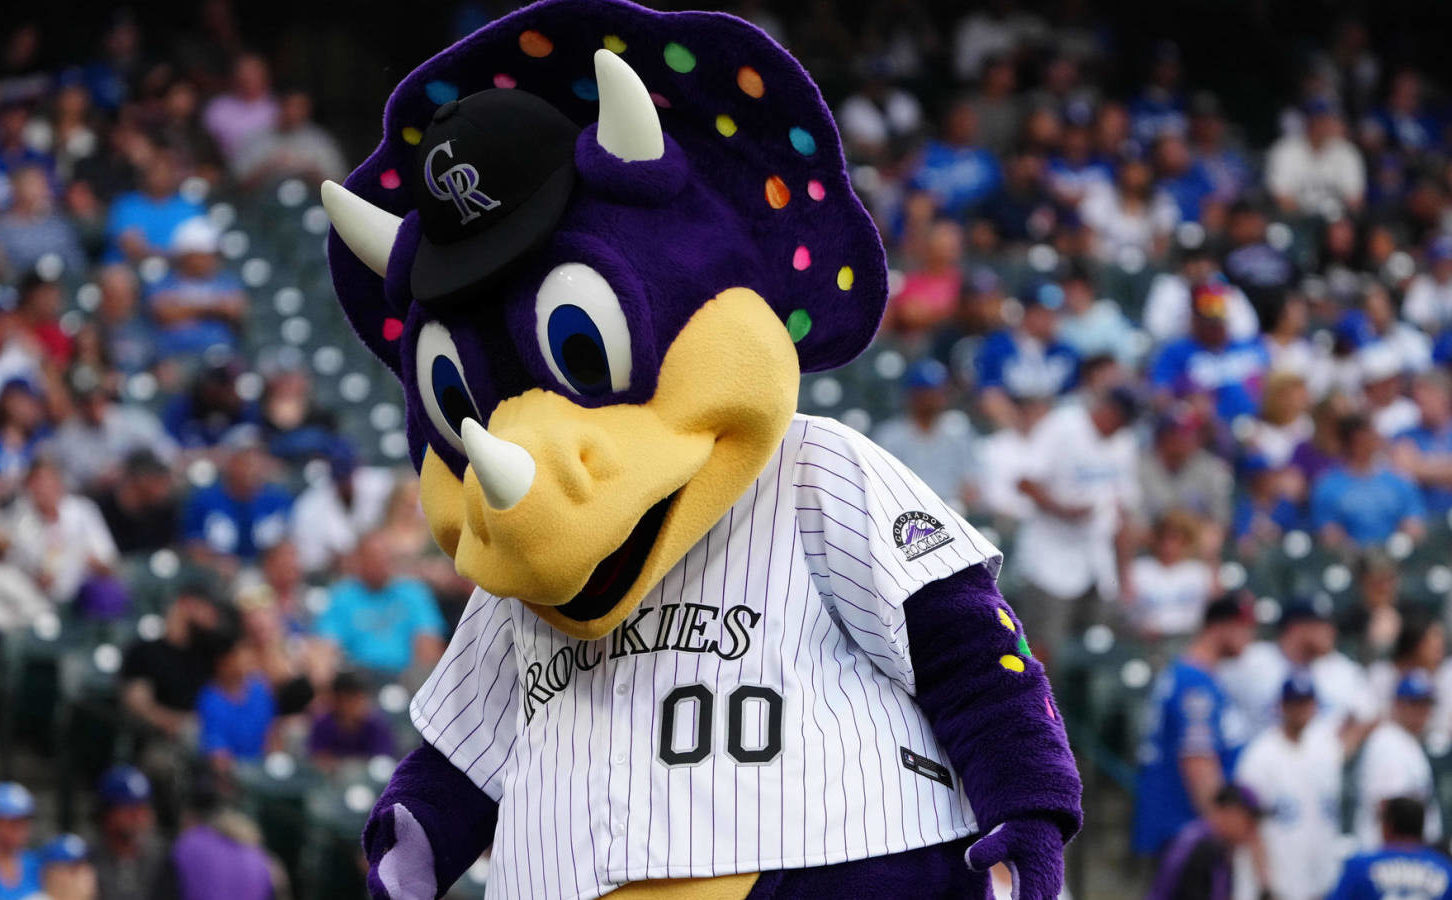 Colorado Rockies mascot Dinger the dinosaur waves to fans as he